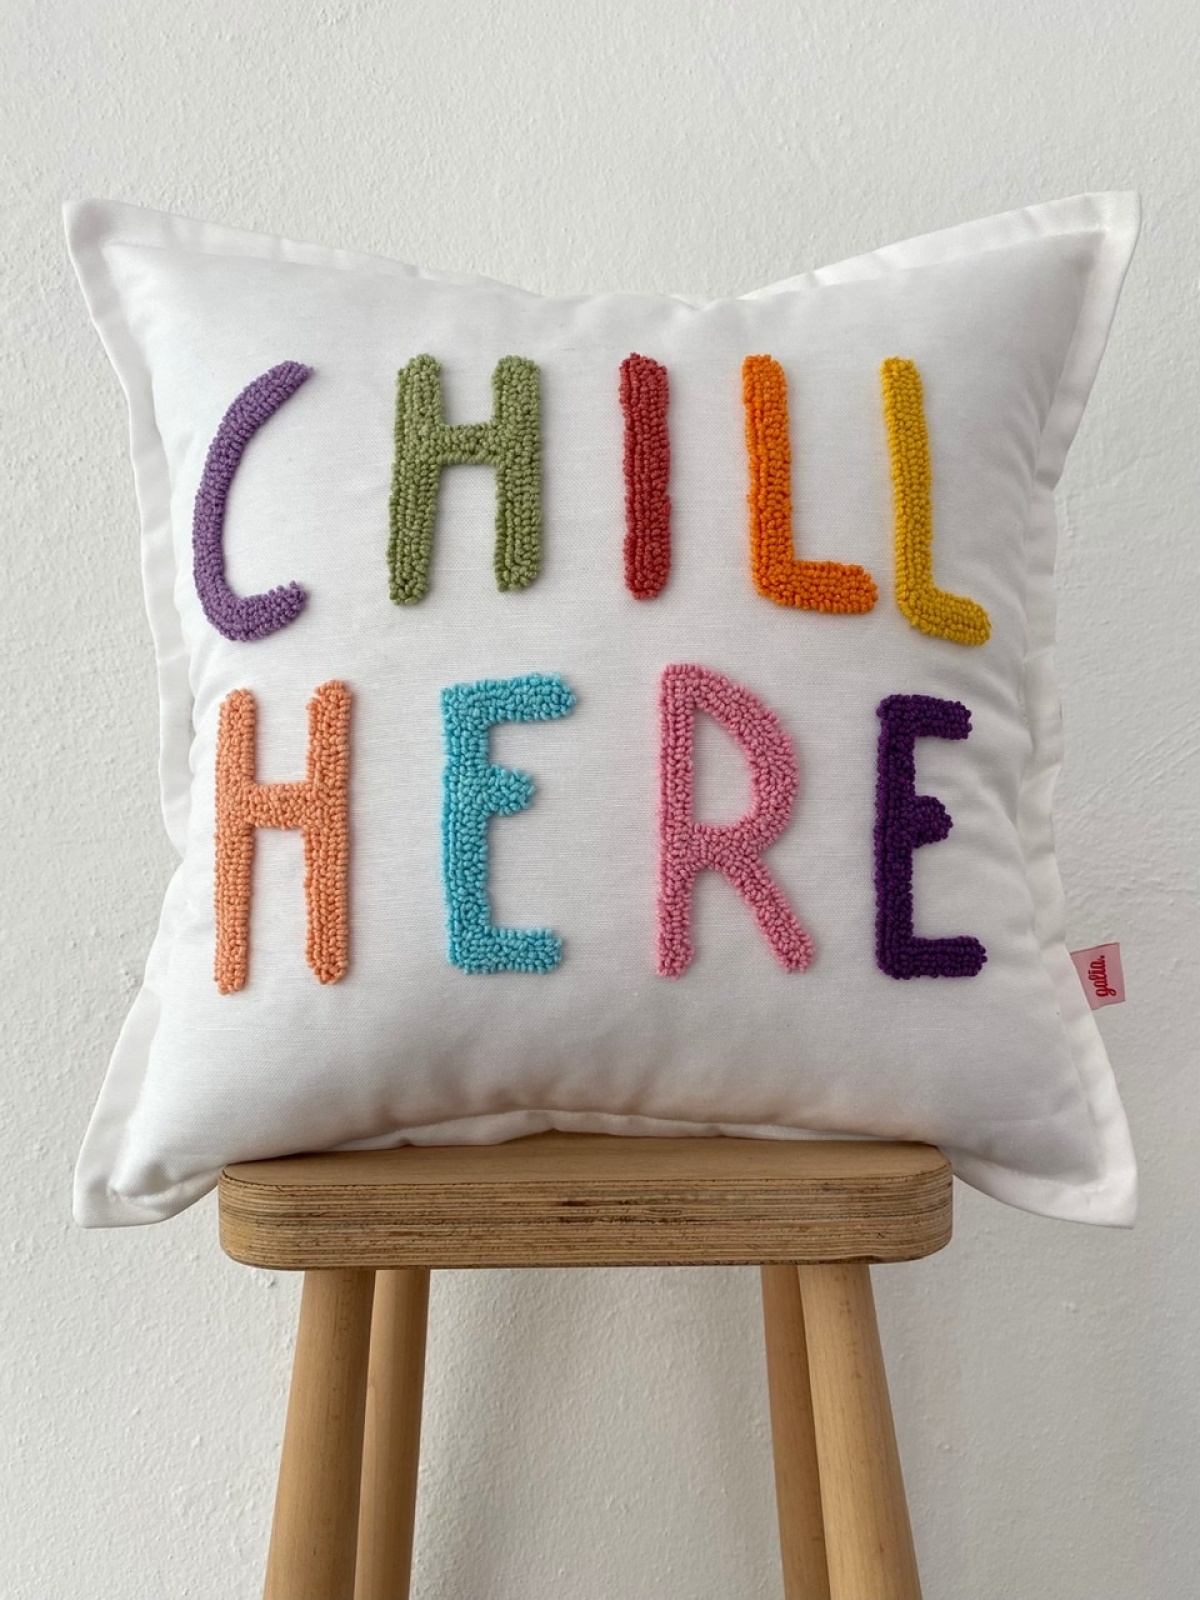 Chill Here Motto Punch Cushion Pillow Cover 45*45 Cm